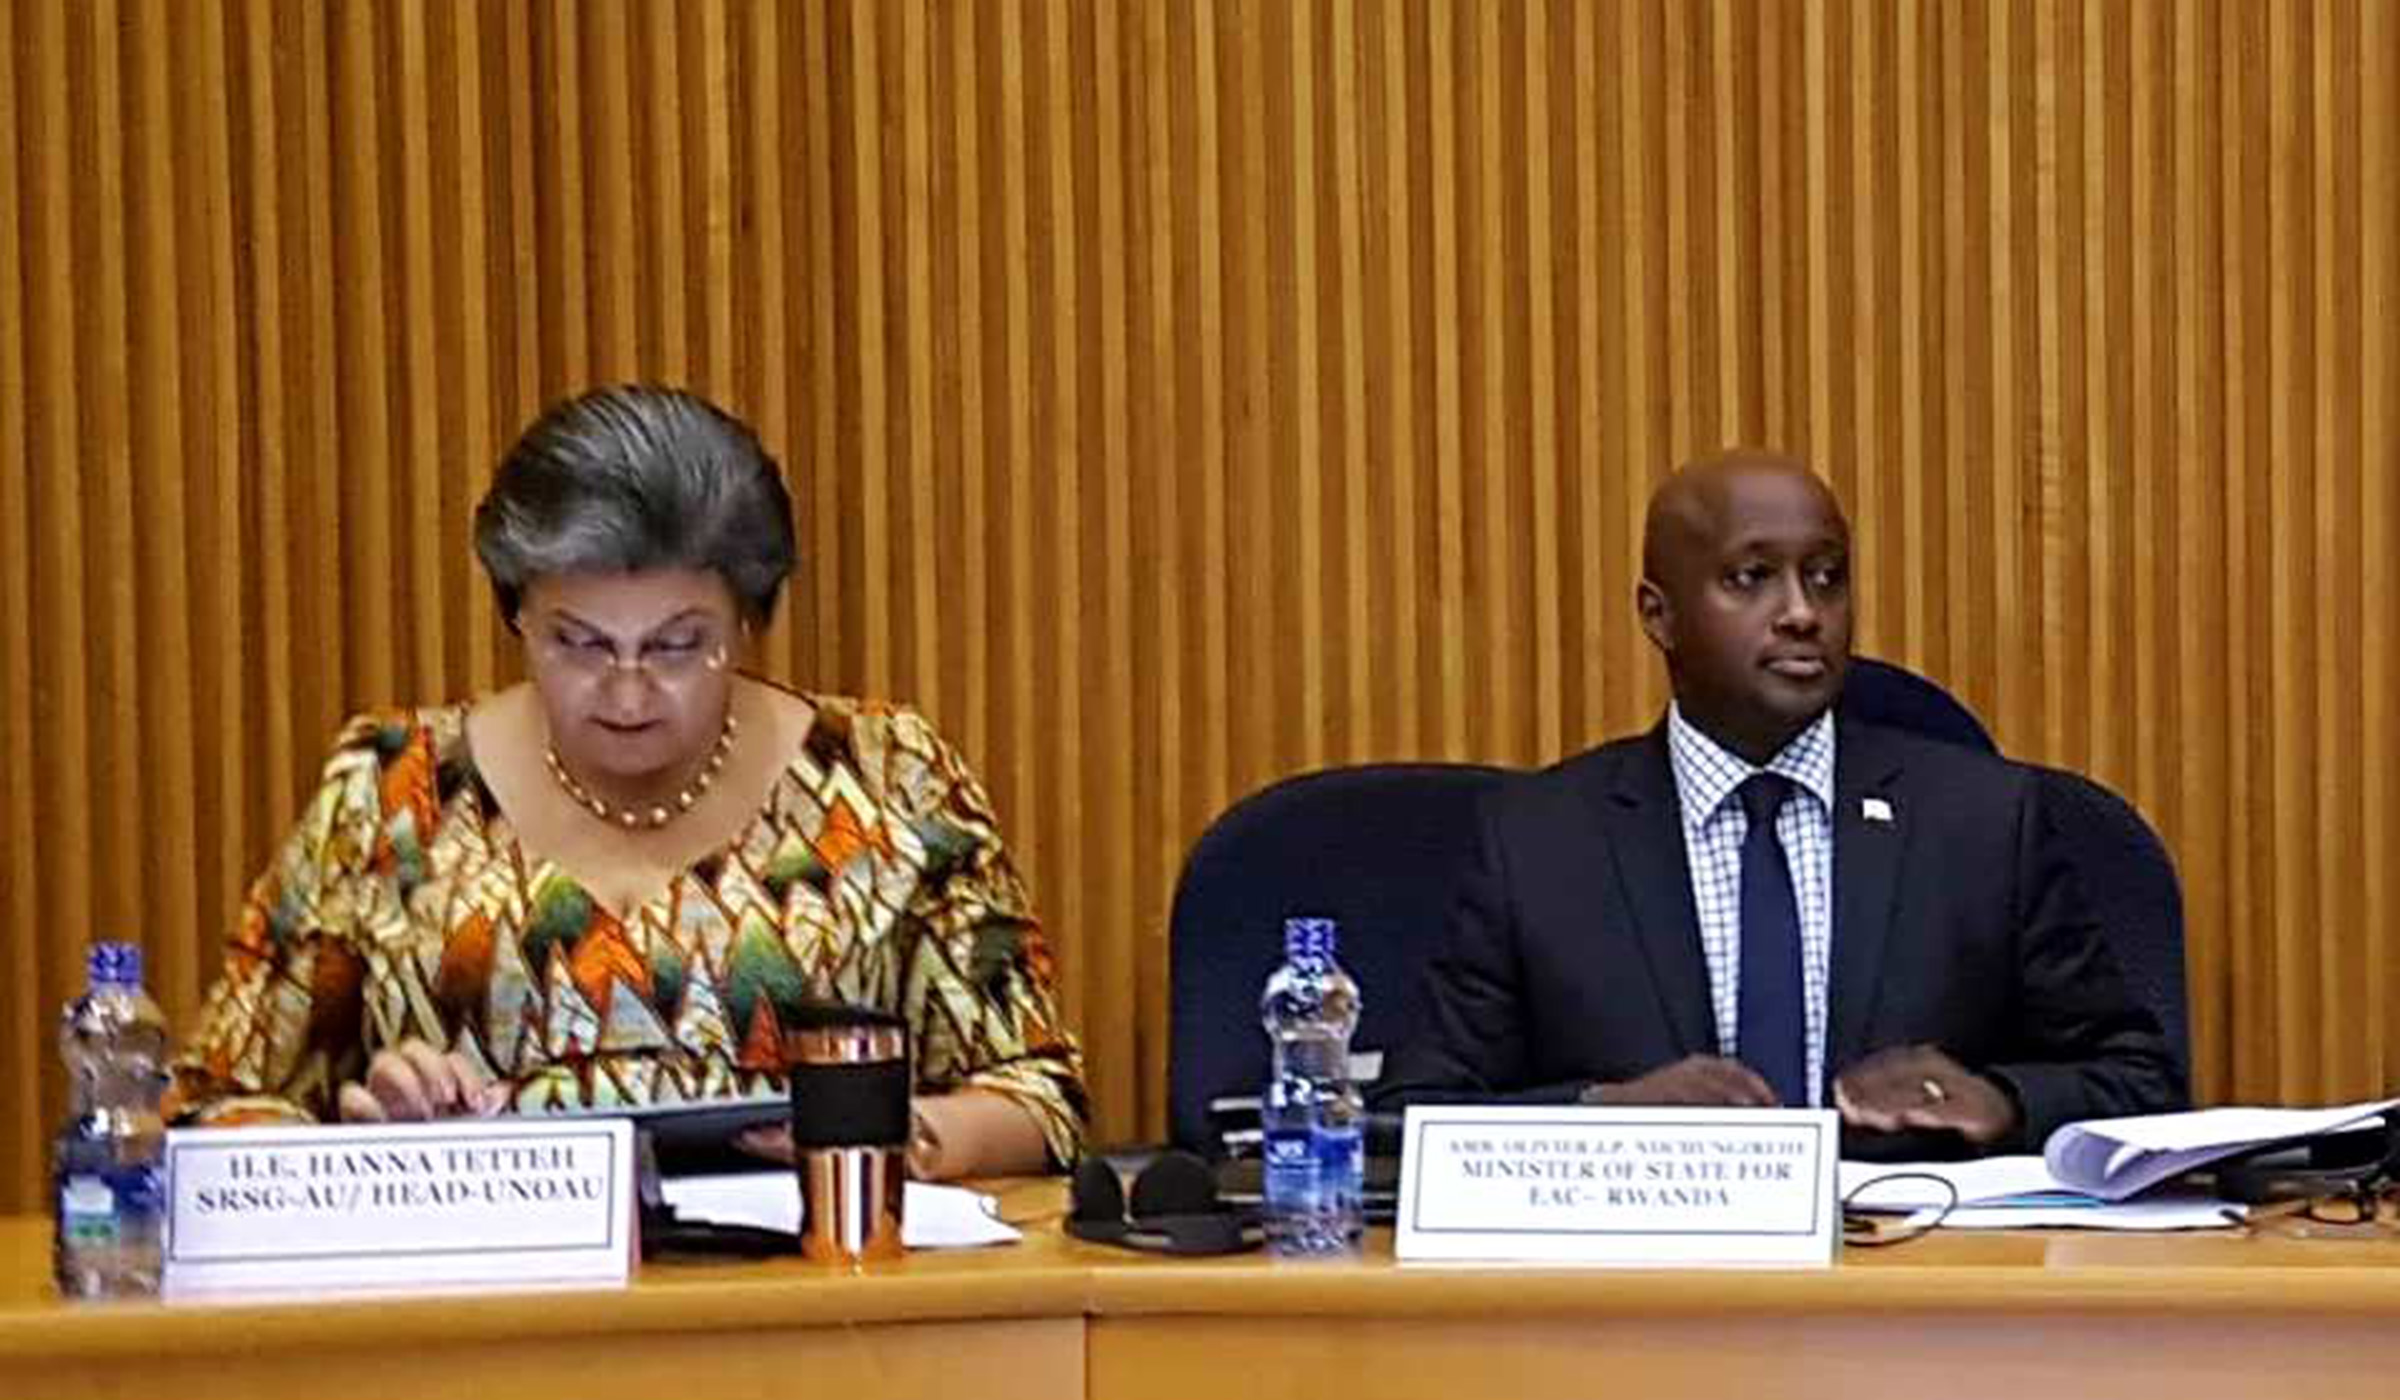 Nduhungirehe (right) and Hanna Serwaa Tetteh, UN Special Representative to the African Union at the session in Addis Ababa yesterday. Courtesy.